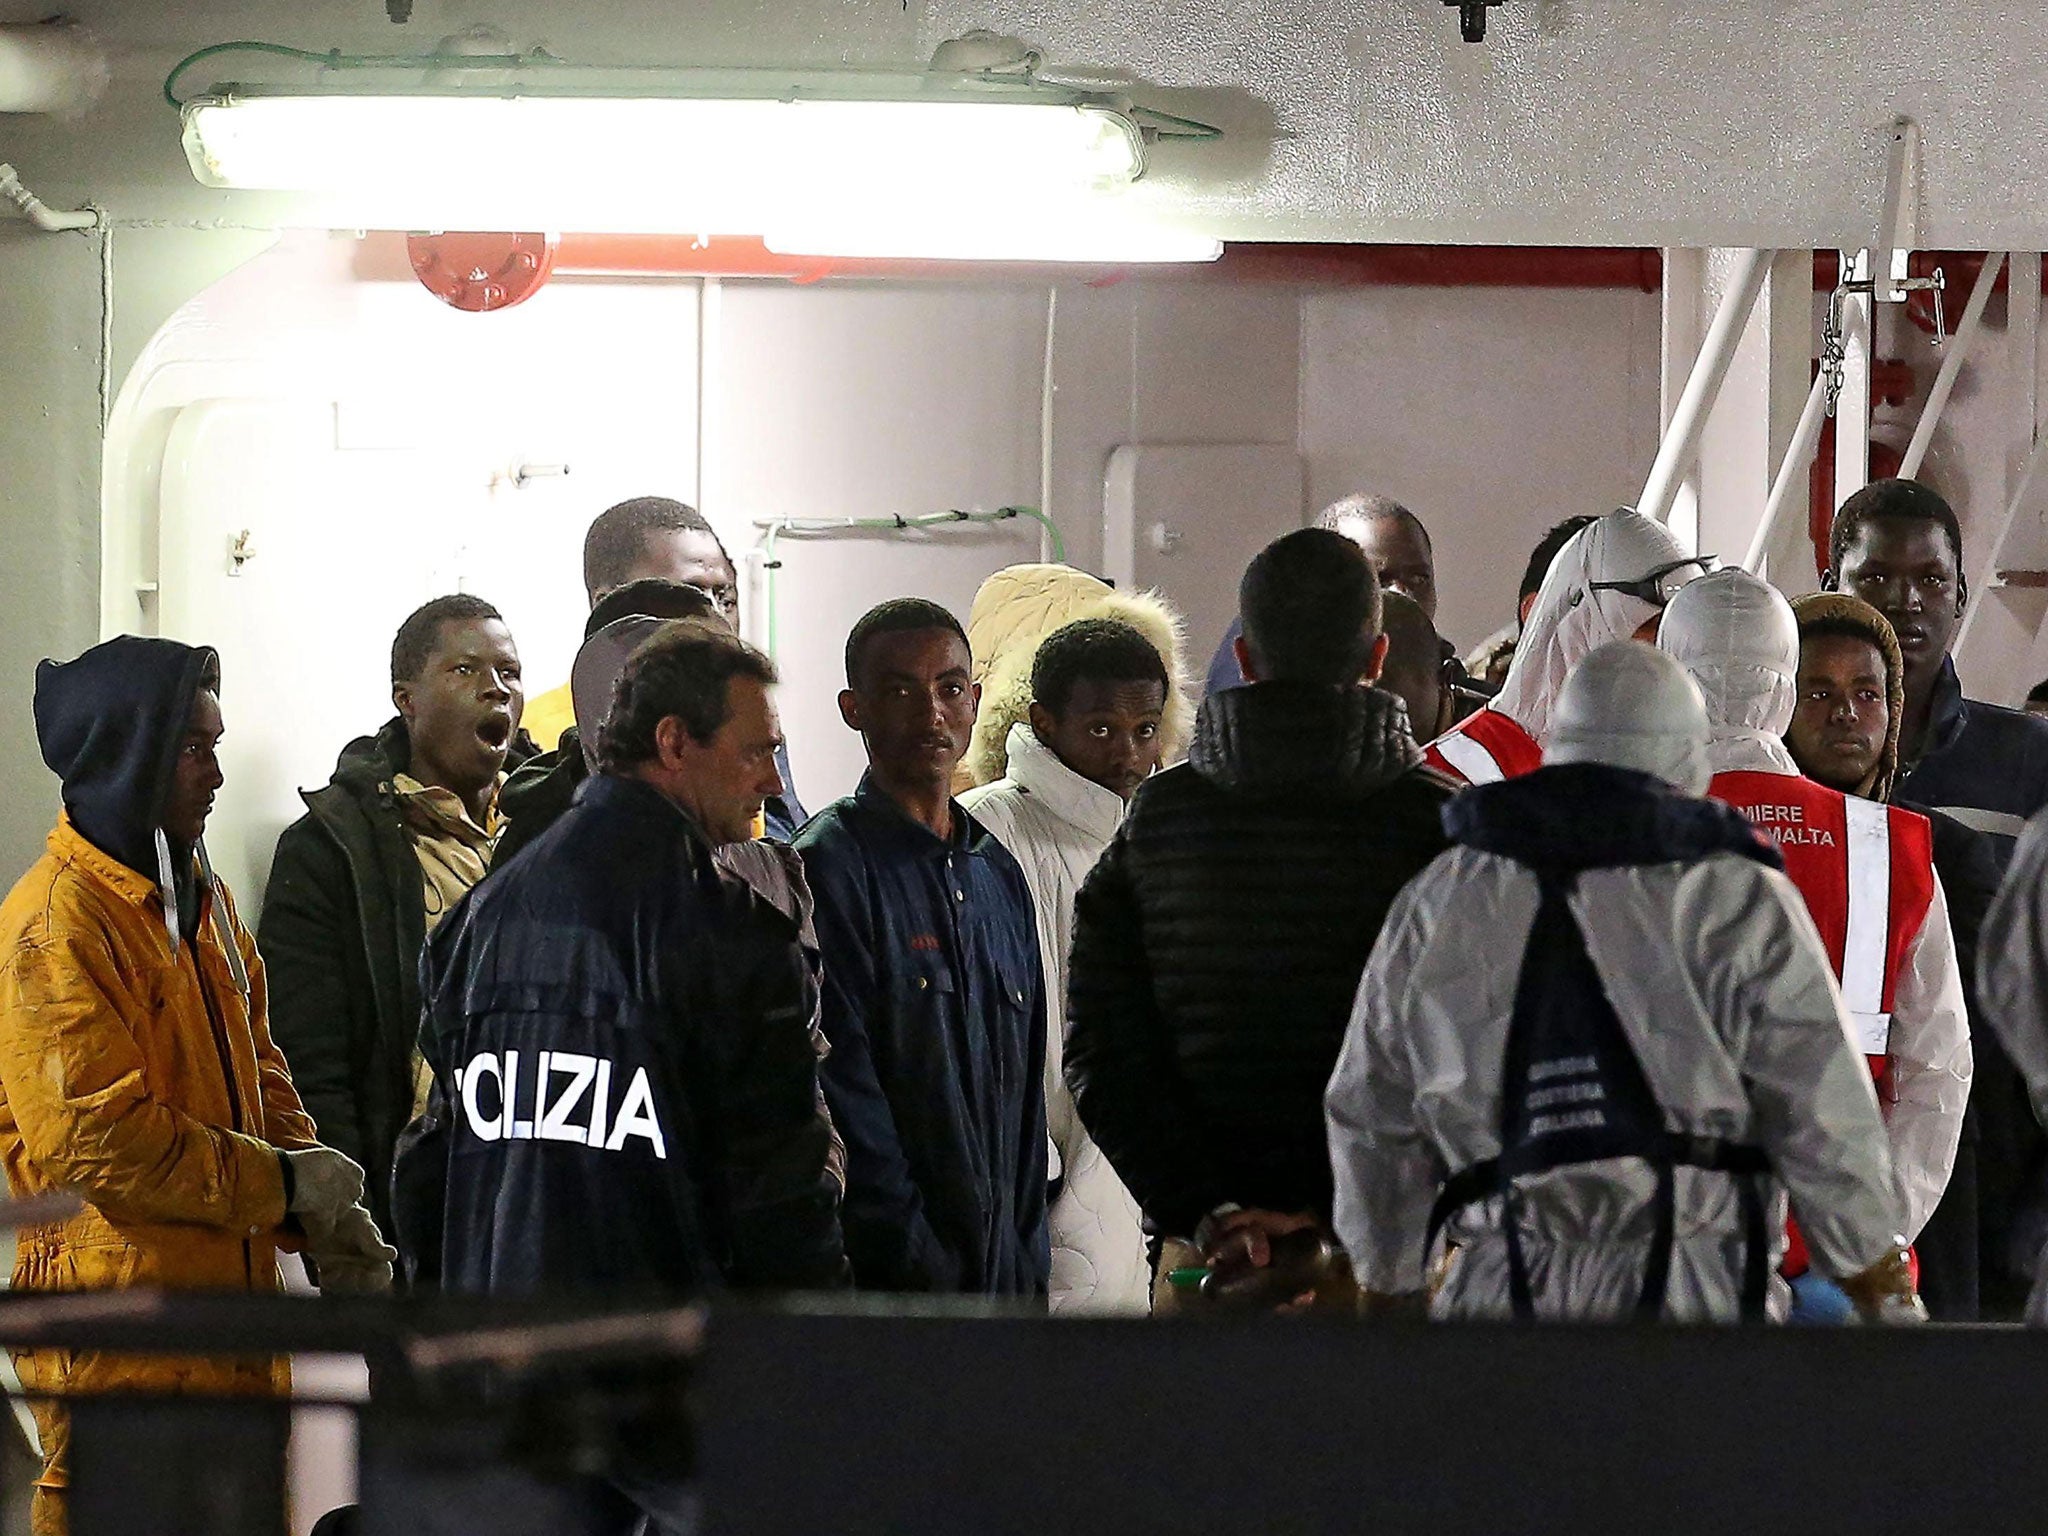 Italian authorities guide migrants who survived recent ship sinkings upon arrival onboard the Italian Coast Guard's vessel Bruno Gregoretti at Catania's port, Sicily, Italy, early 21 April 2015